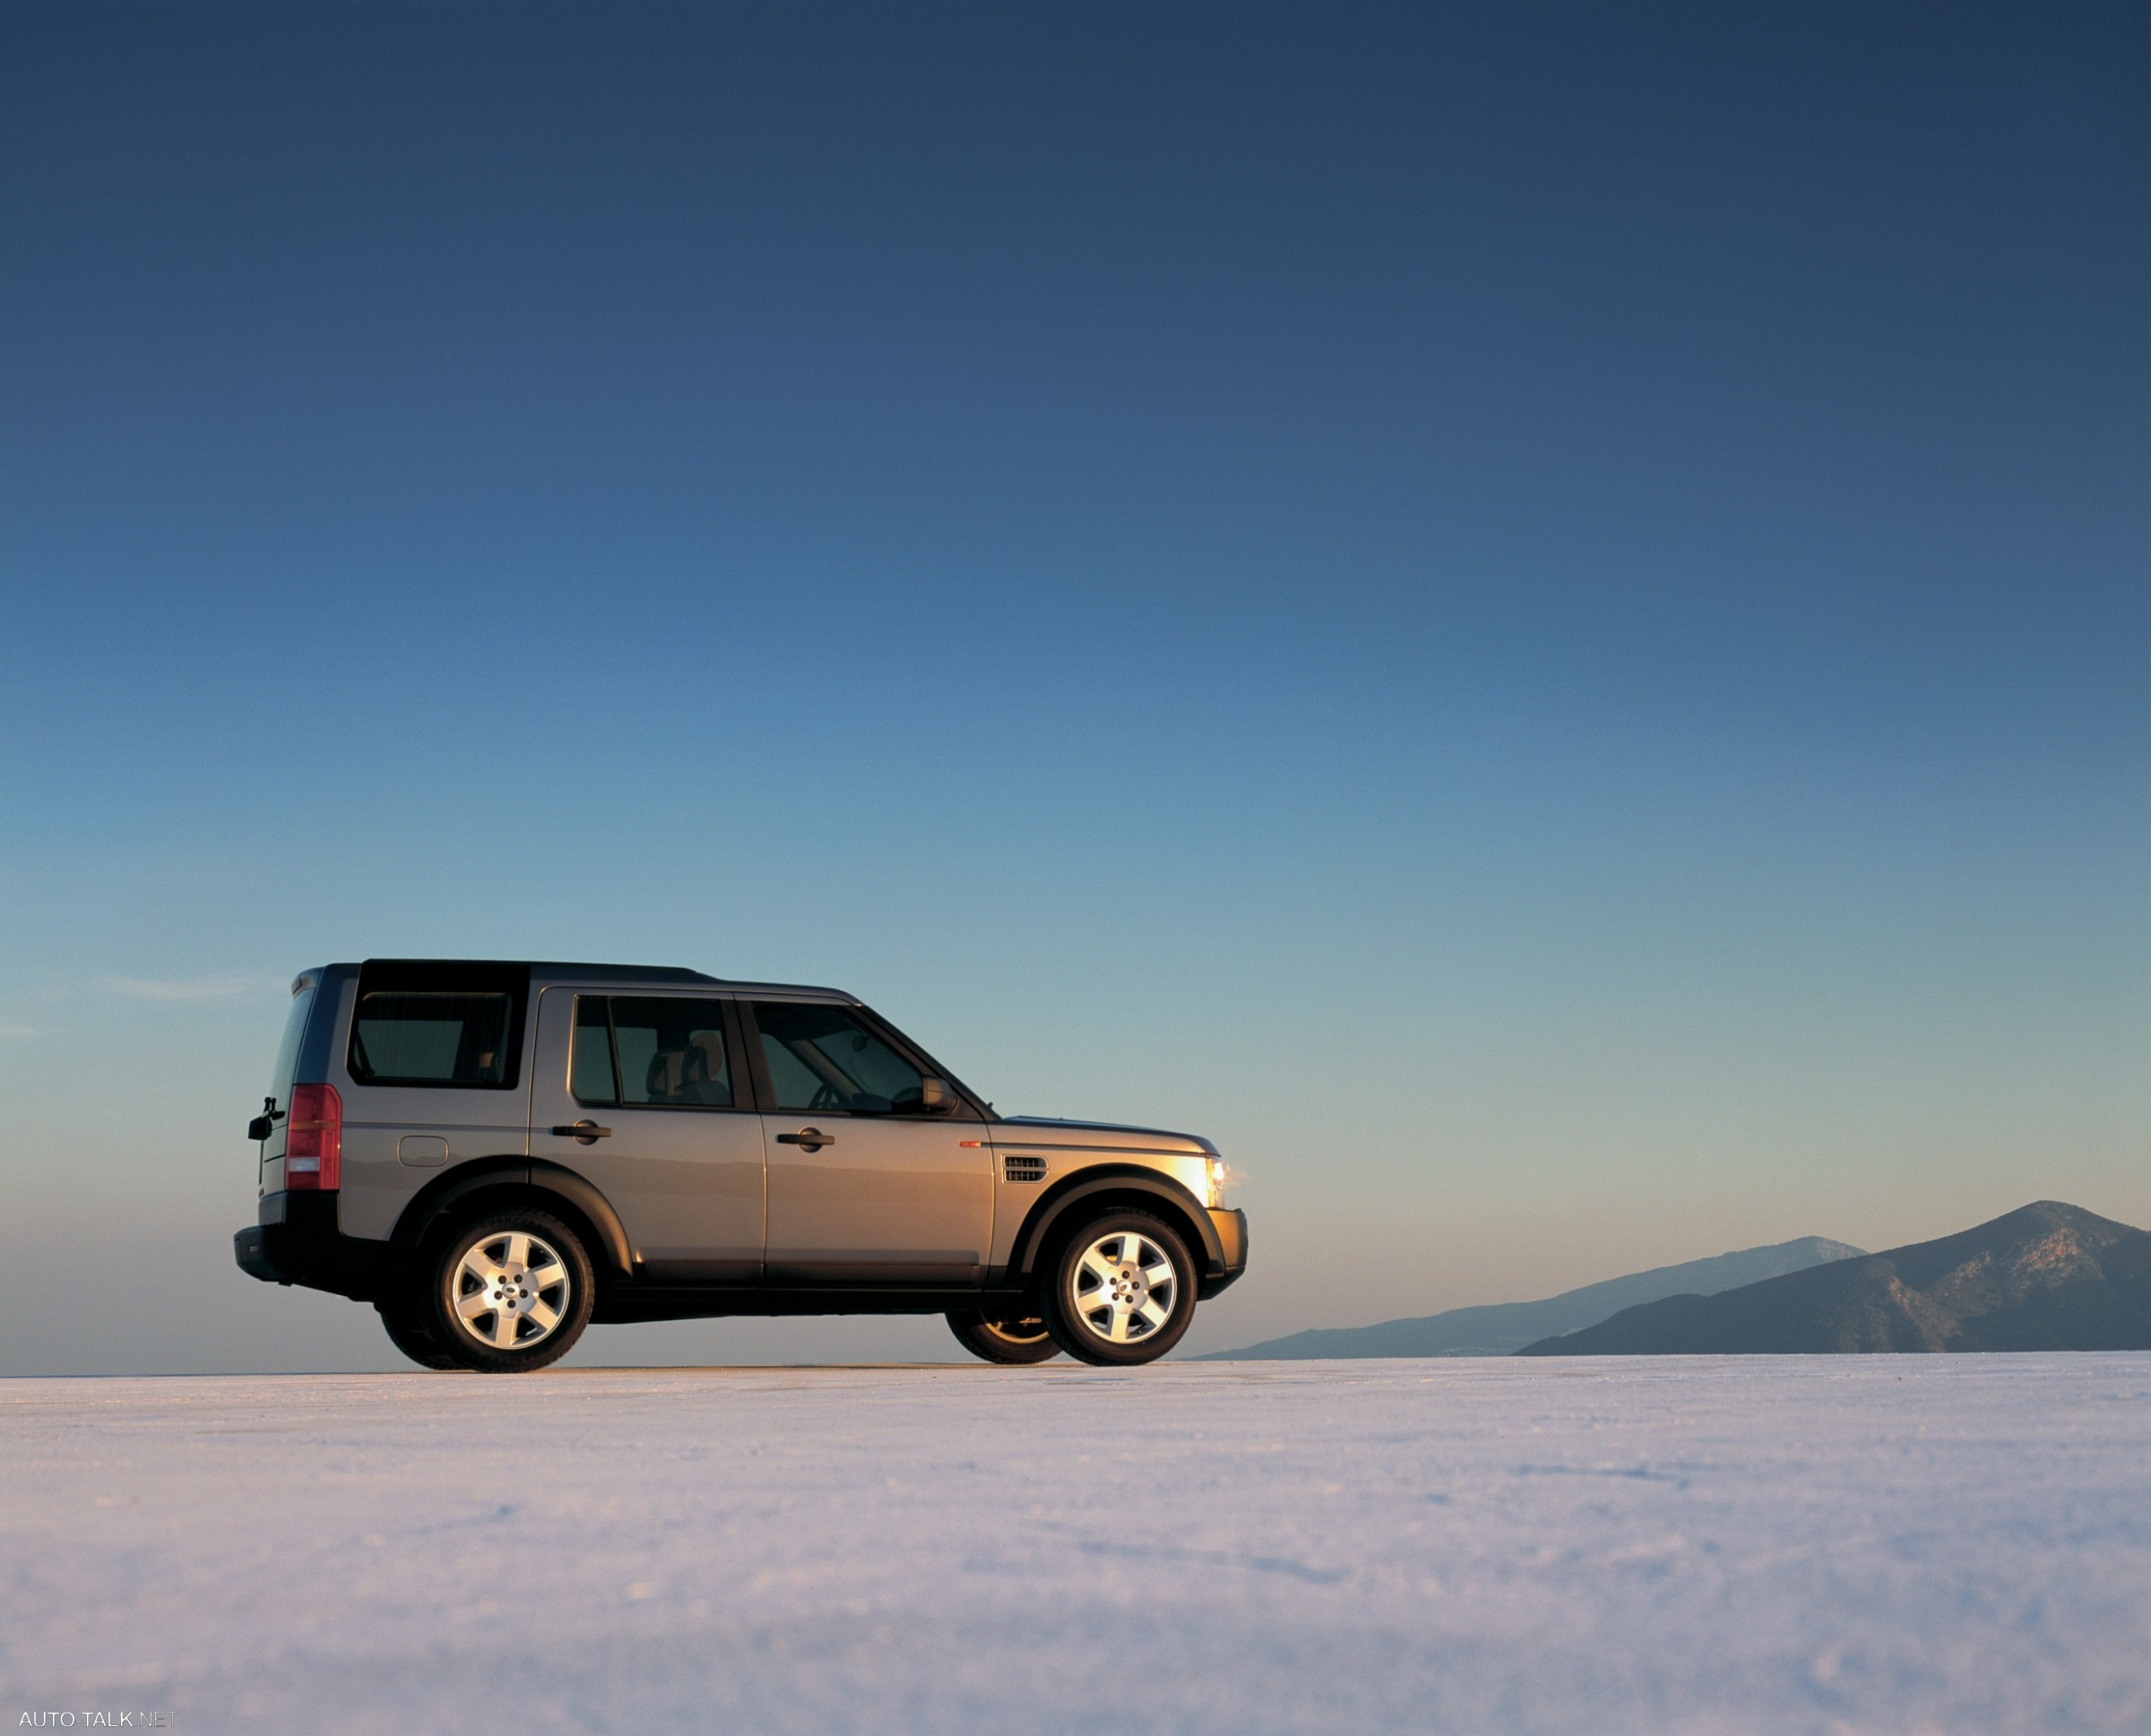 Дискавери три. Land Rover Discovery 3. Land Rover Discovery 2005. Land Rover Discovery 3 2009. Land Rover Discovery 4 Overland.